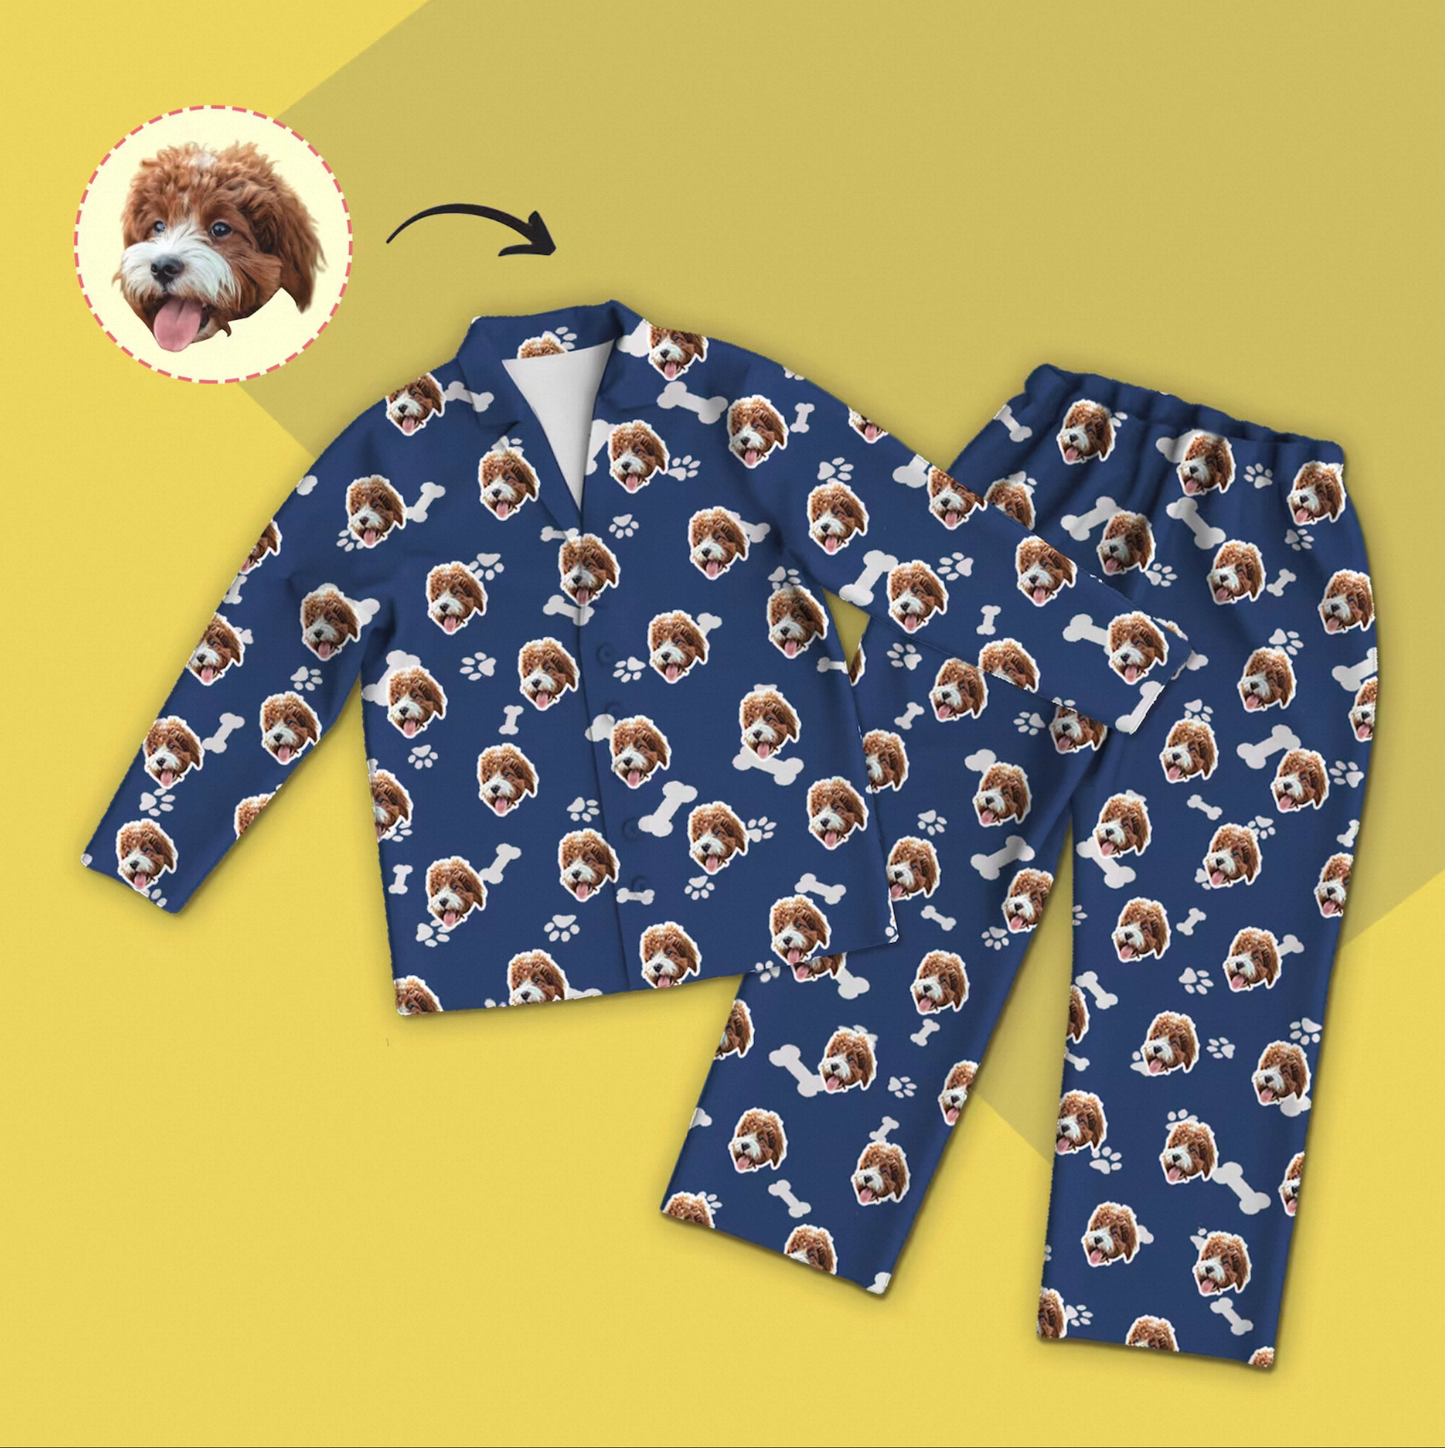 Custom Pet Photo Pajama Pants for Women or Men-Personalized Dog Face copy Unisex Pajamas with Bone - Best Christmas/Birthday Gift for Family